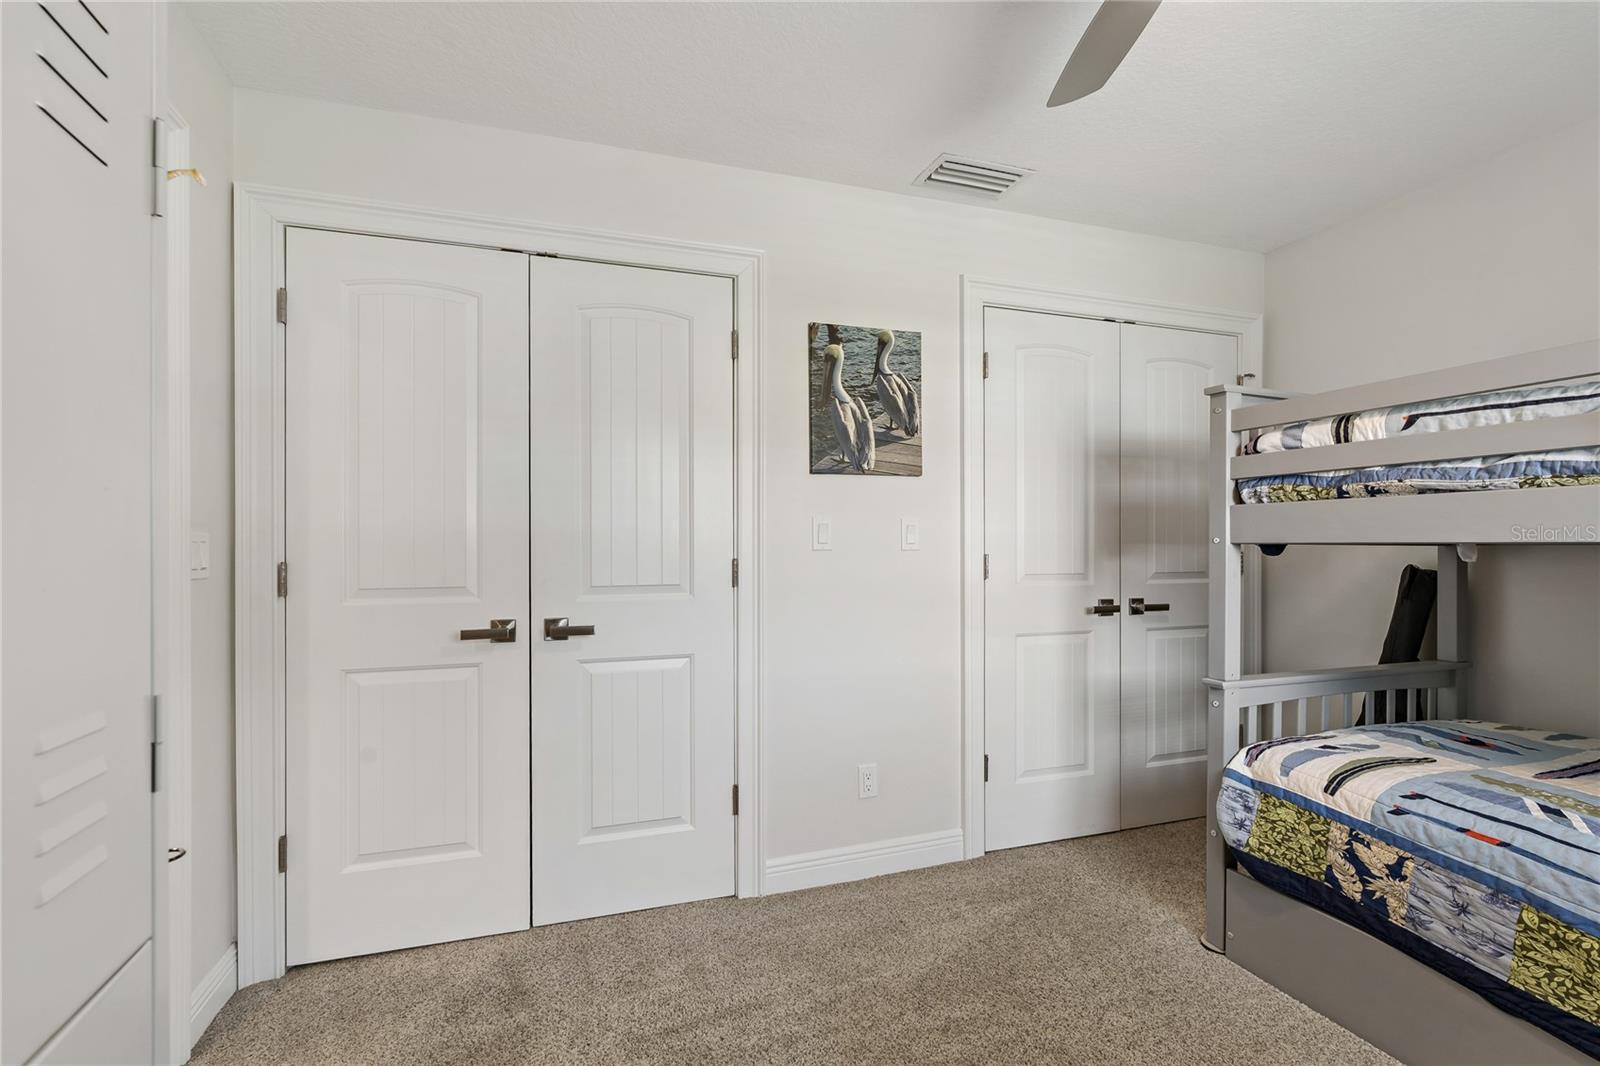 BUILT IN LINEN CLOSET WITH PULL OUT SHELVES!